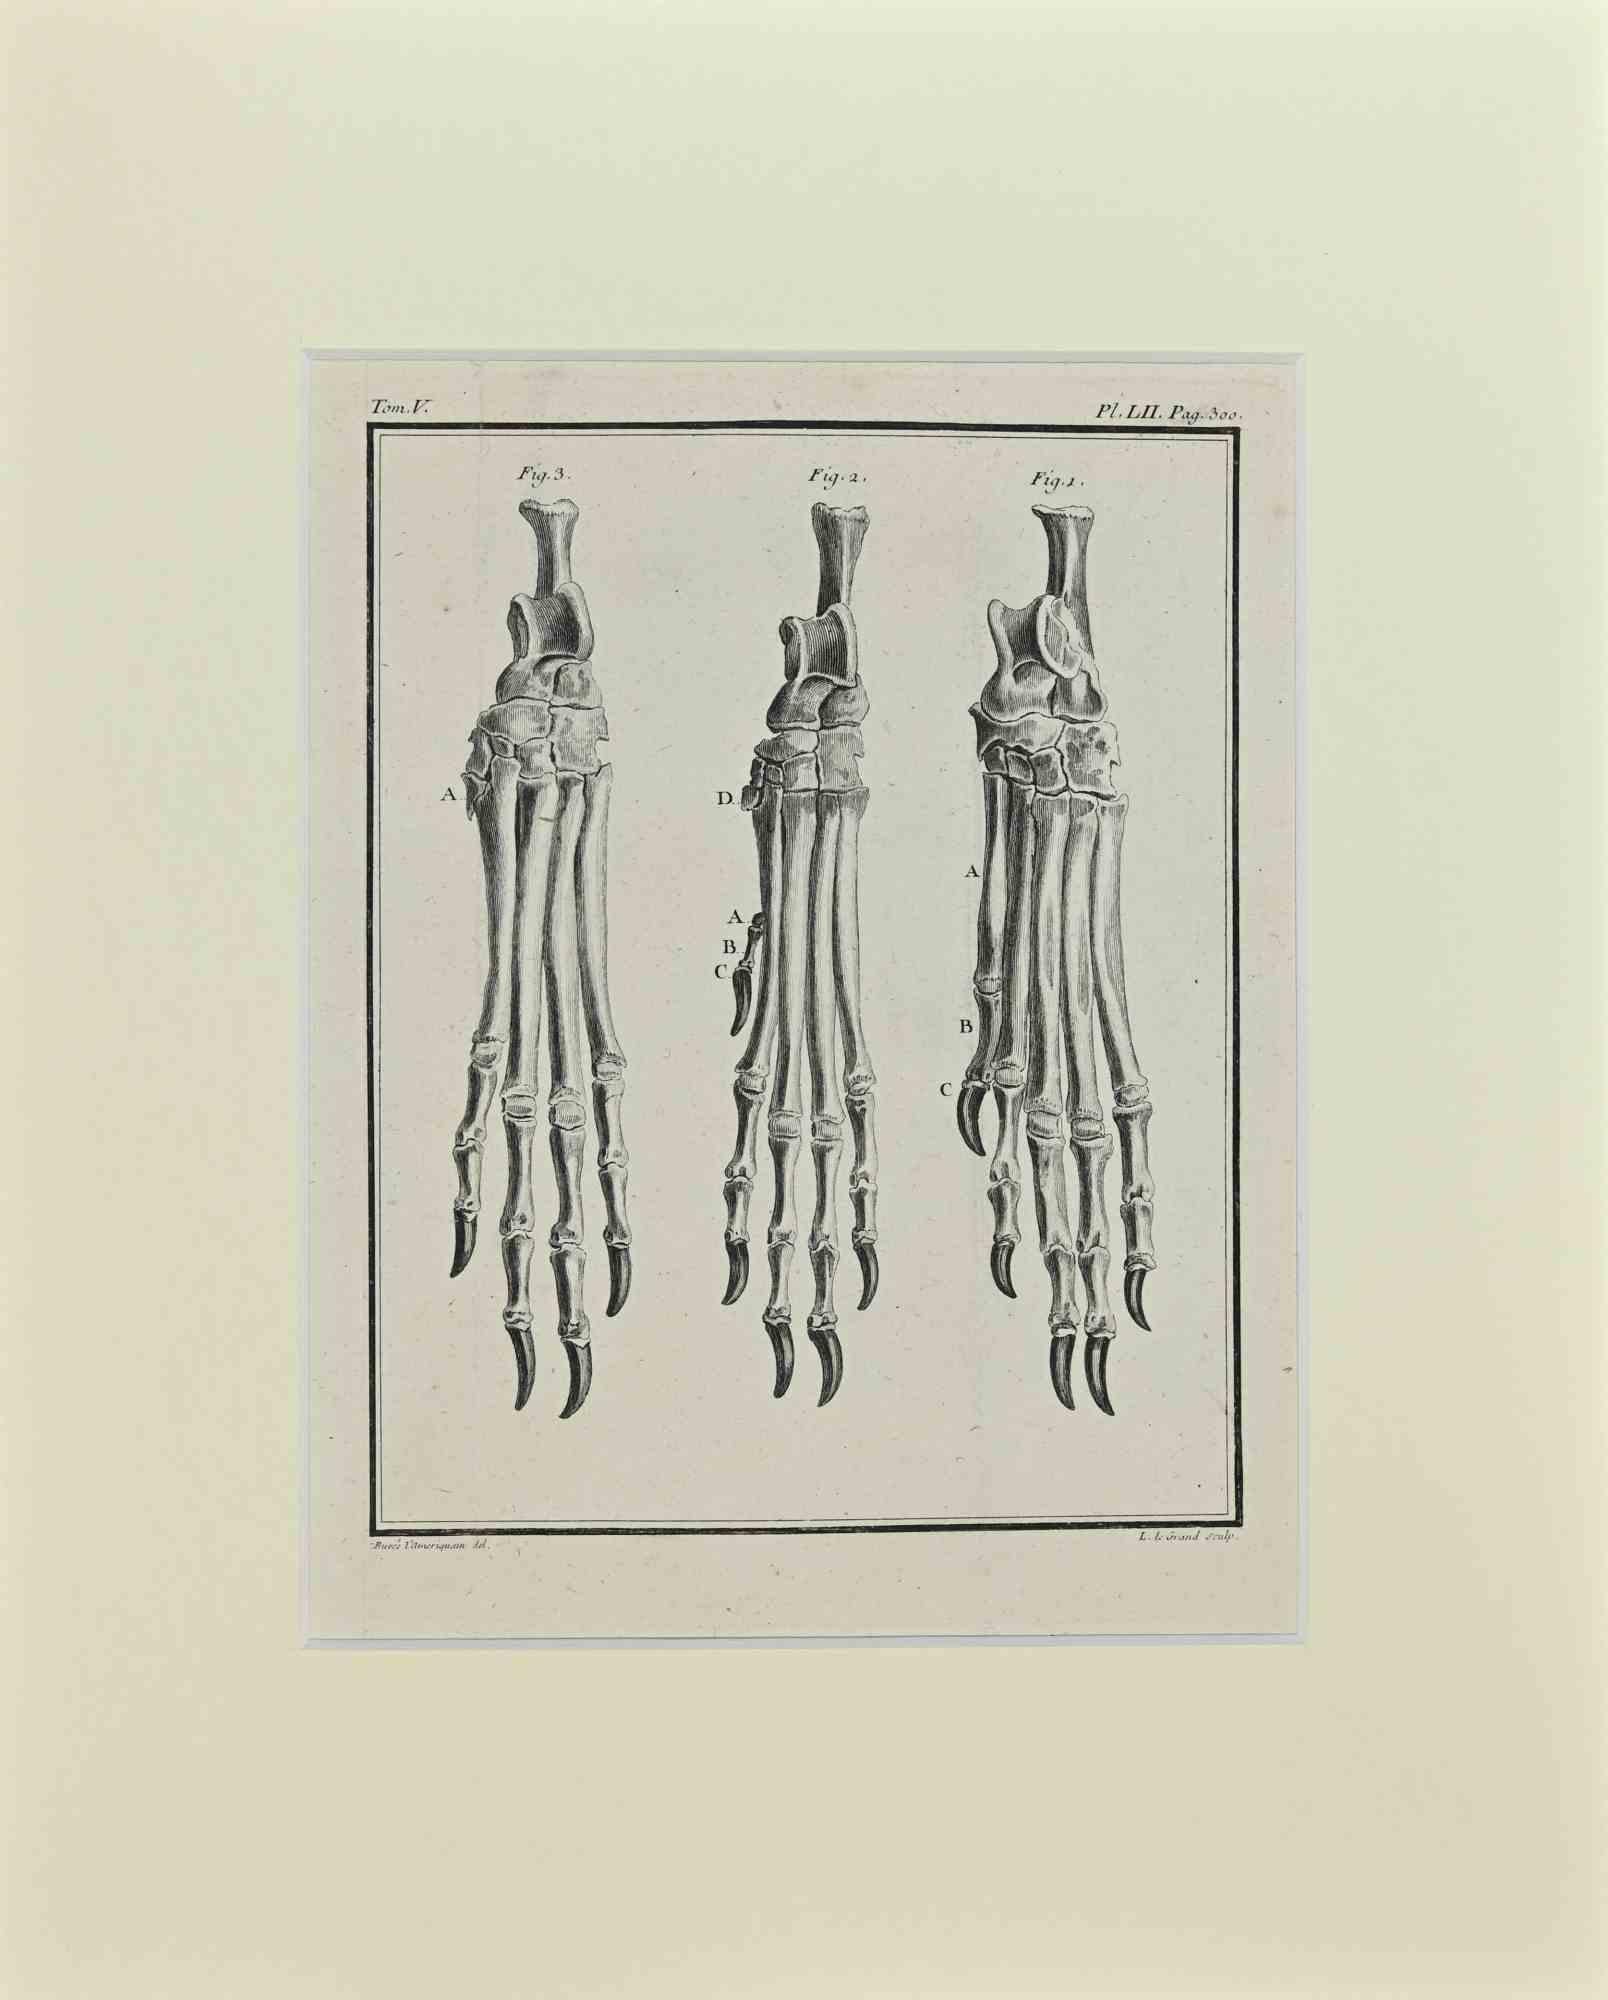 The Structure of the paw bones of animals is an artwork realized by Buvée l'Américain in 1771.  

Etching B./W. print  on ivory paper. Signed on  plate on the lower left margin.

The work is glued on cardboard. Total dimensions: 35x28 cm.

The